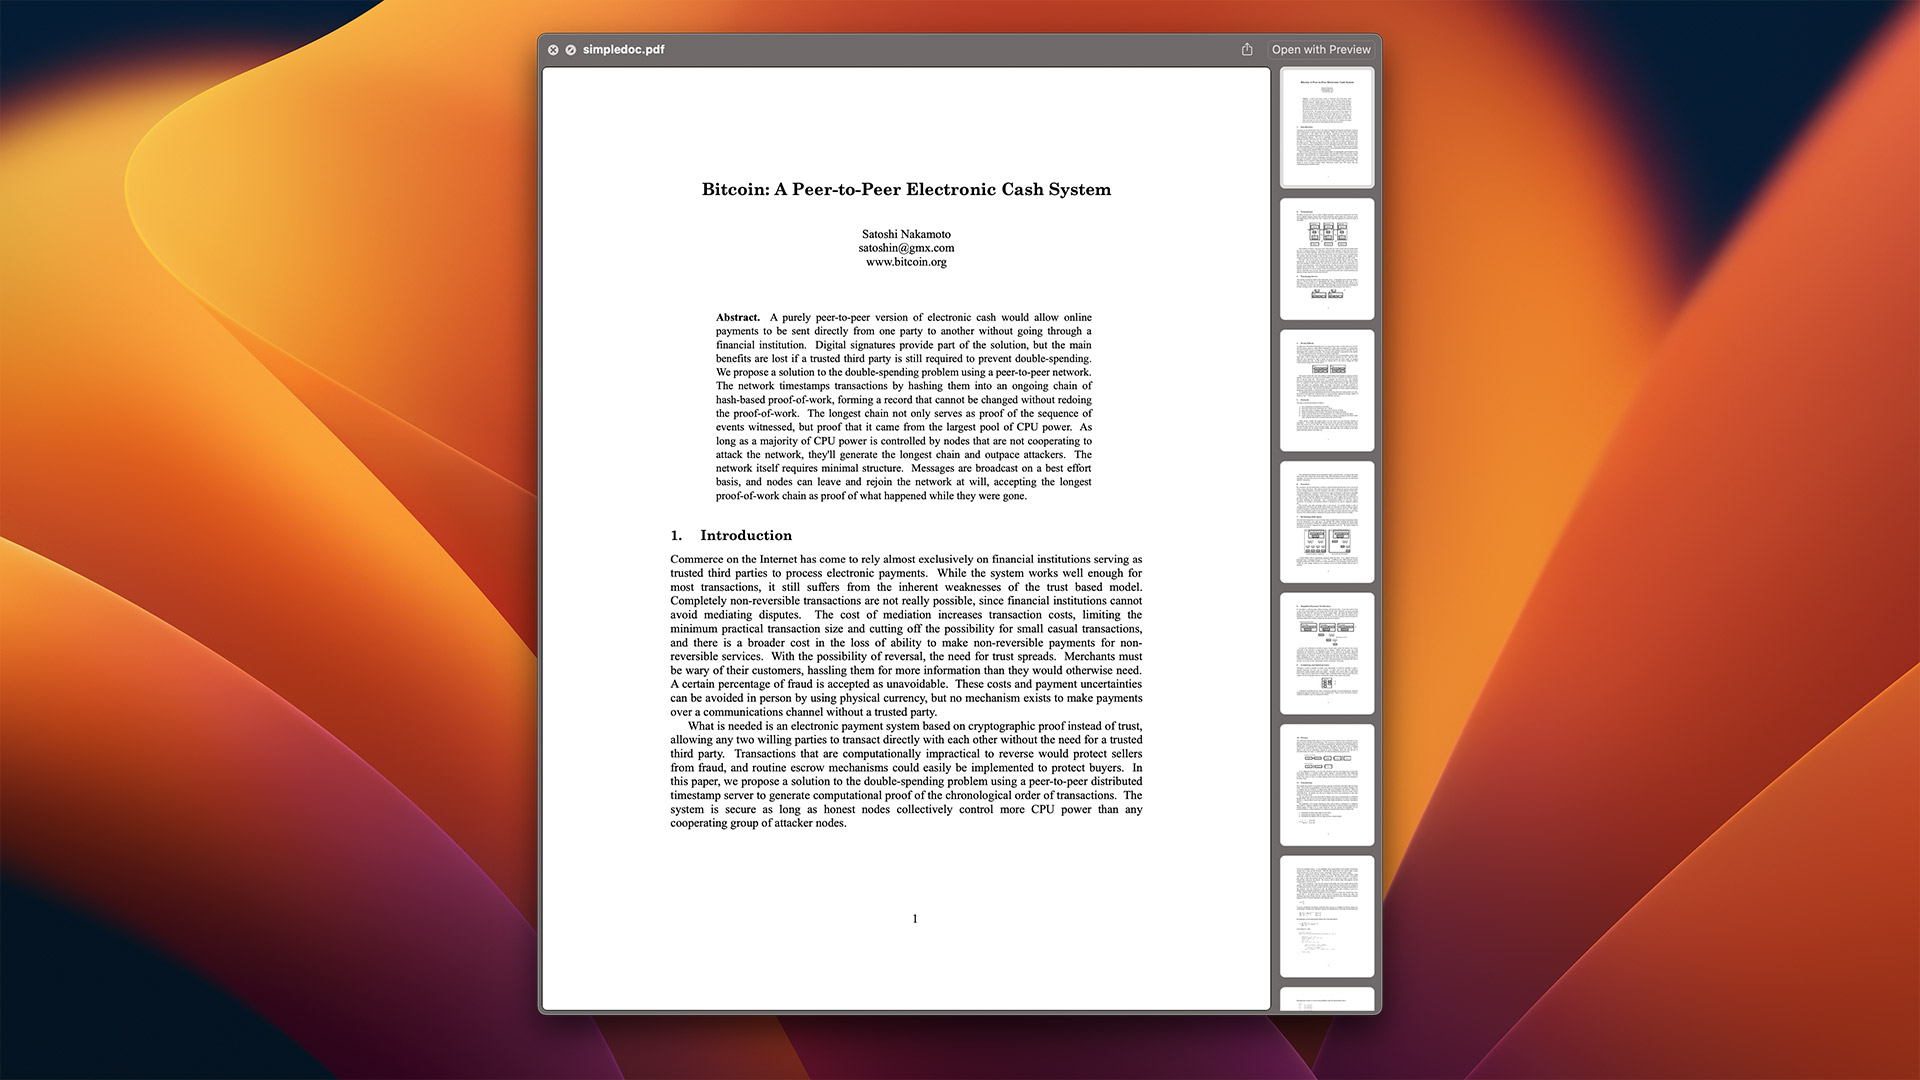 Apple removes Bitcoin whitepaper from the latest macOS beta